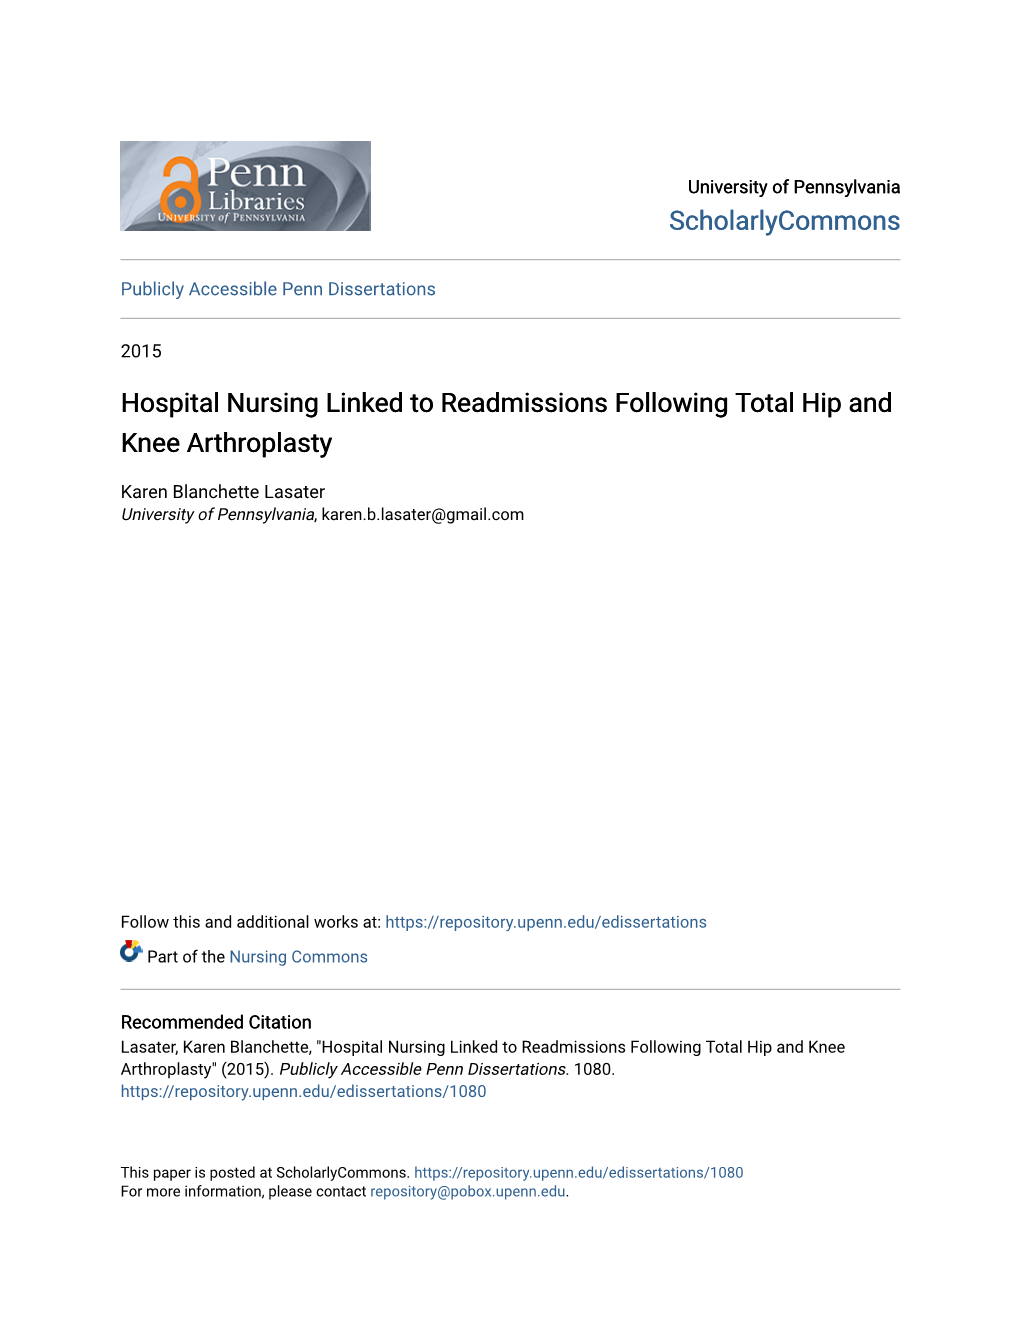 Hospital Nursing Linked to Readmissions Following Total Hip and Knee Arthroplasty